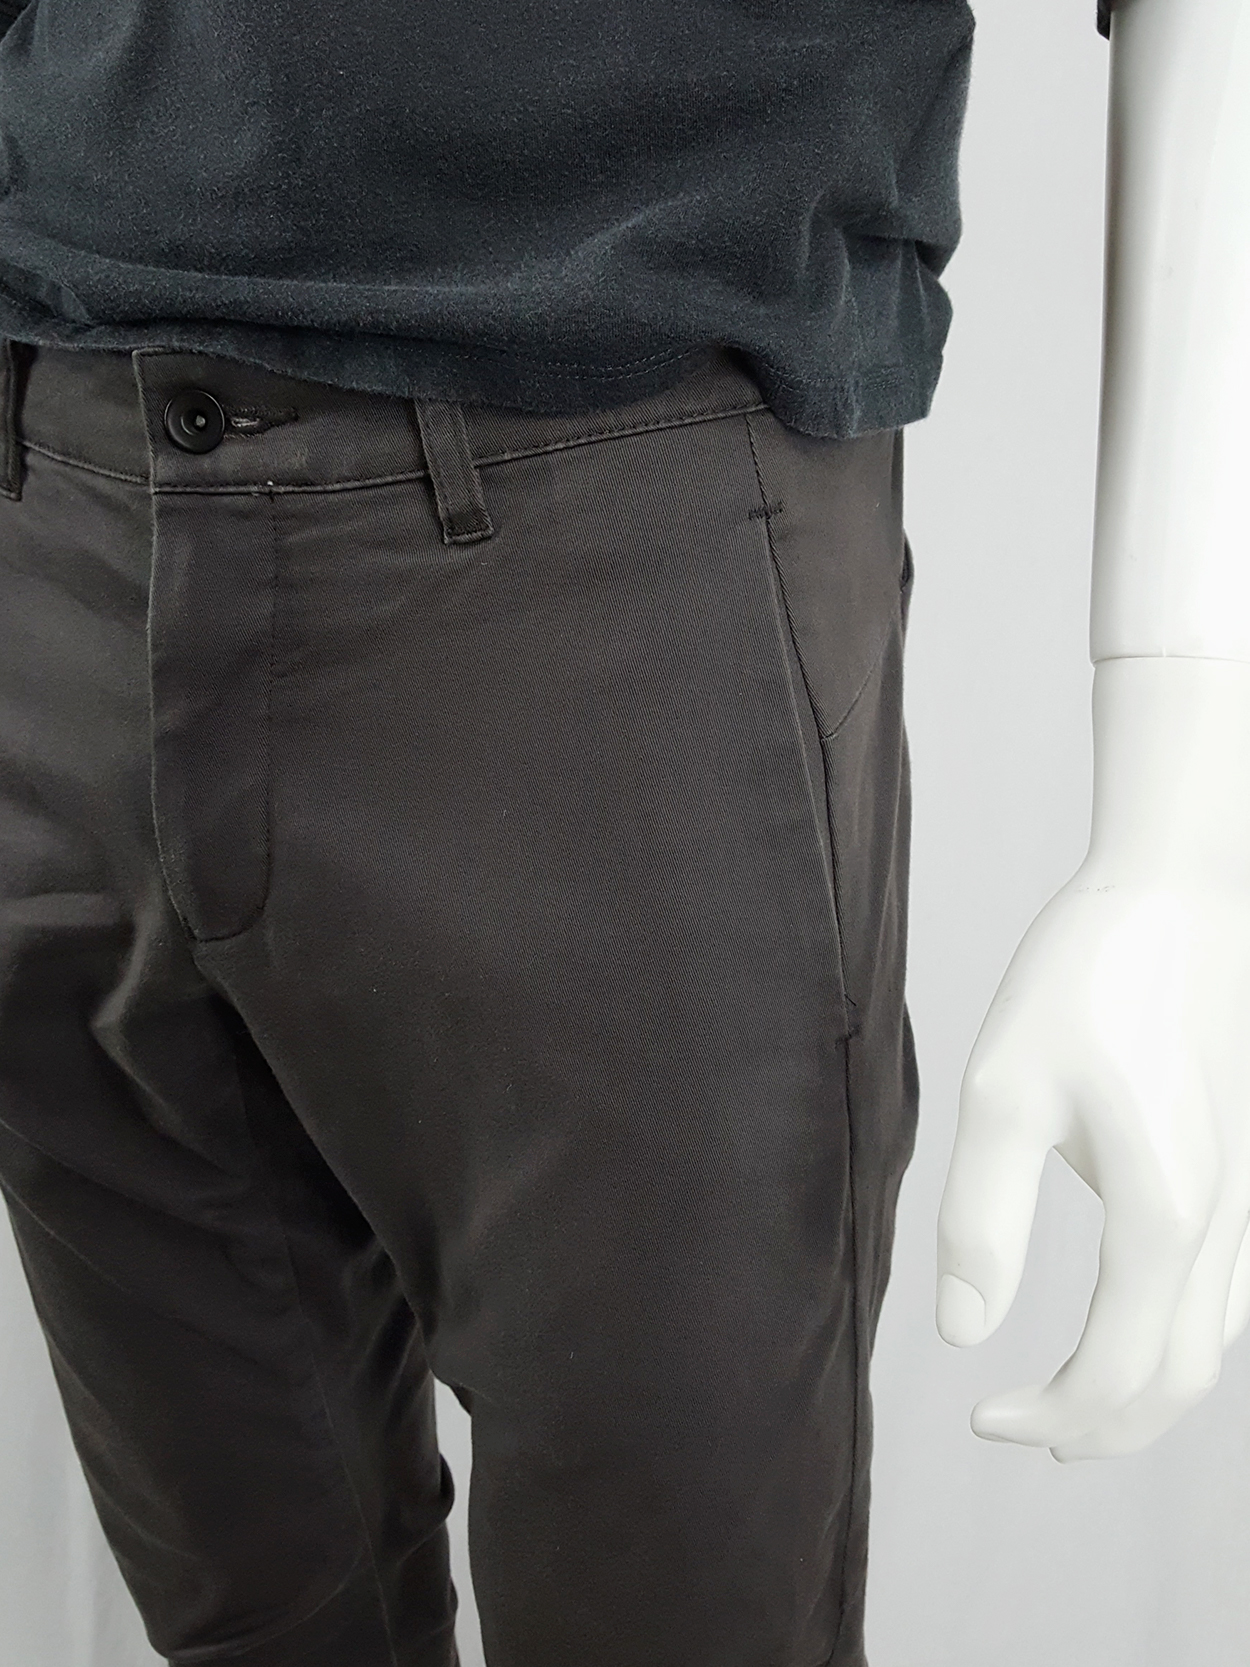 Attachment Kayuzuki Kumagai grey trousers with curved legs - V A N II T A S